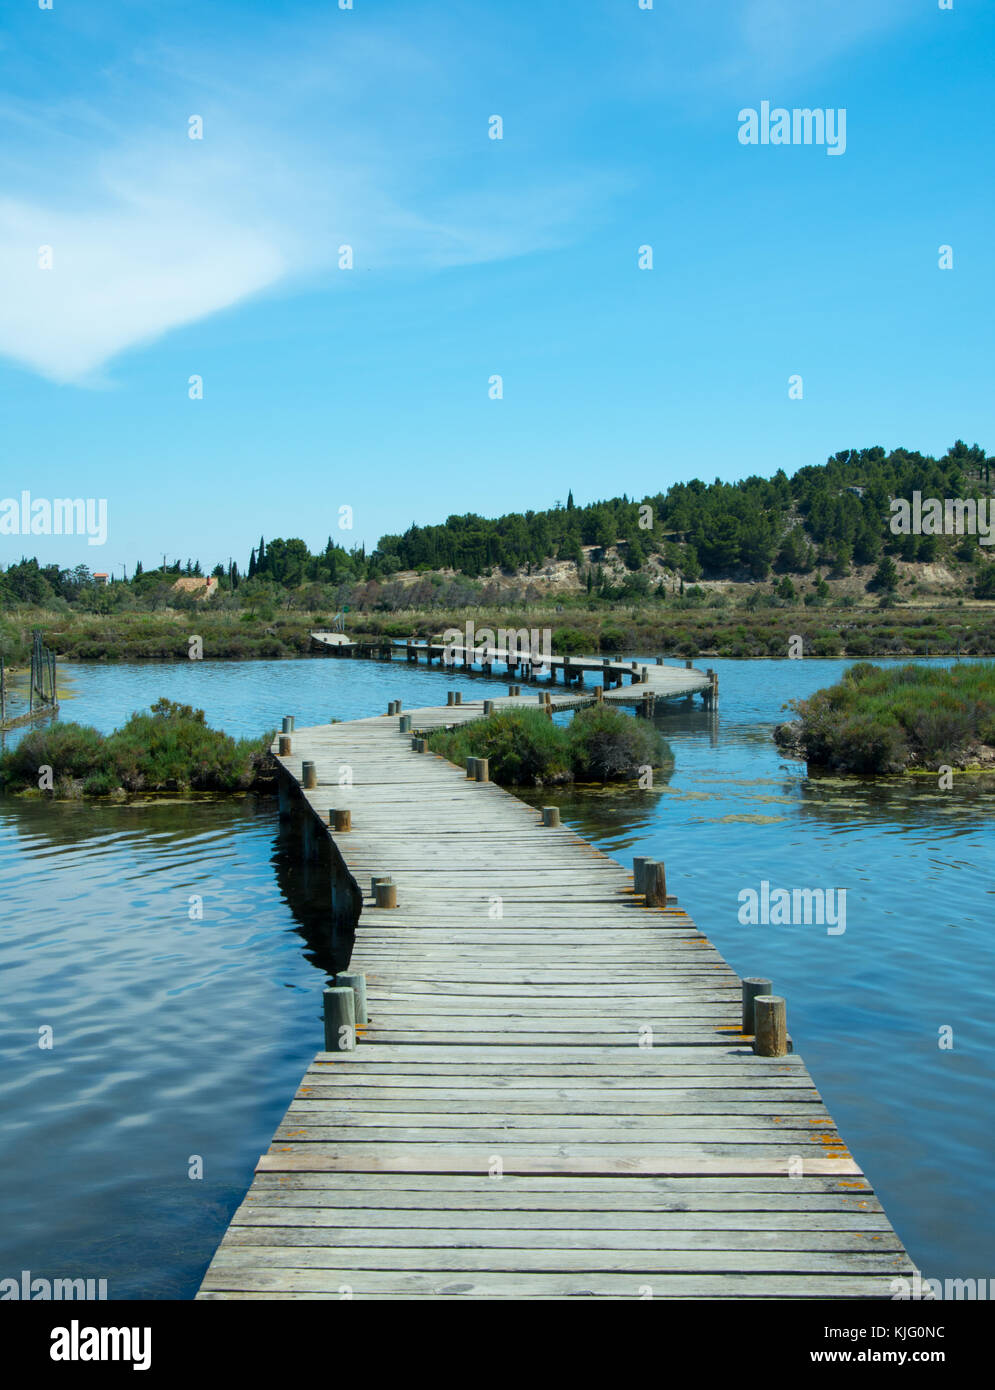 A boardwalk stretches out over calm  lagoon in a wild natural setting - an ideal location for bird watching and getting back to nature Stock Photo